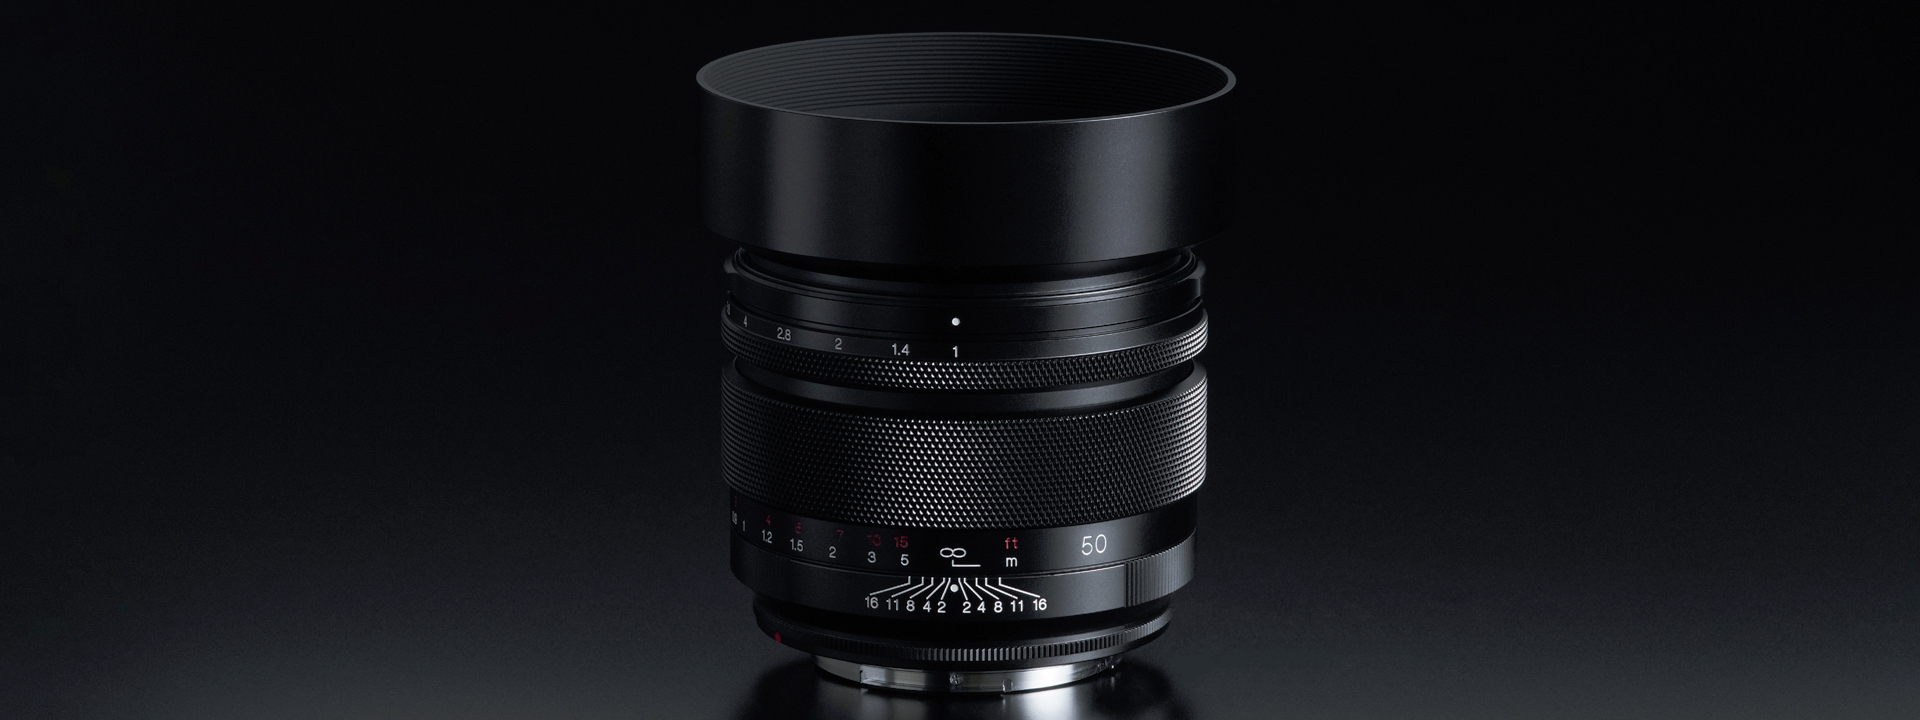 RF 50 10 01 - Voigtlander Nokton RF 50mm f/1 specifications and pricing released